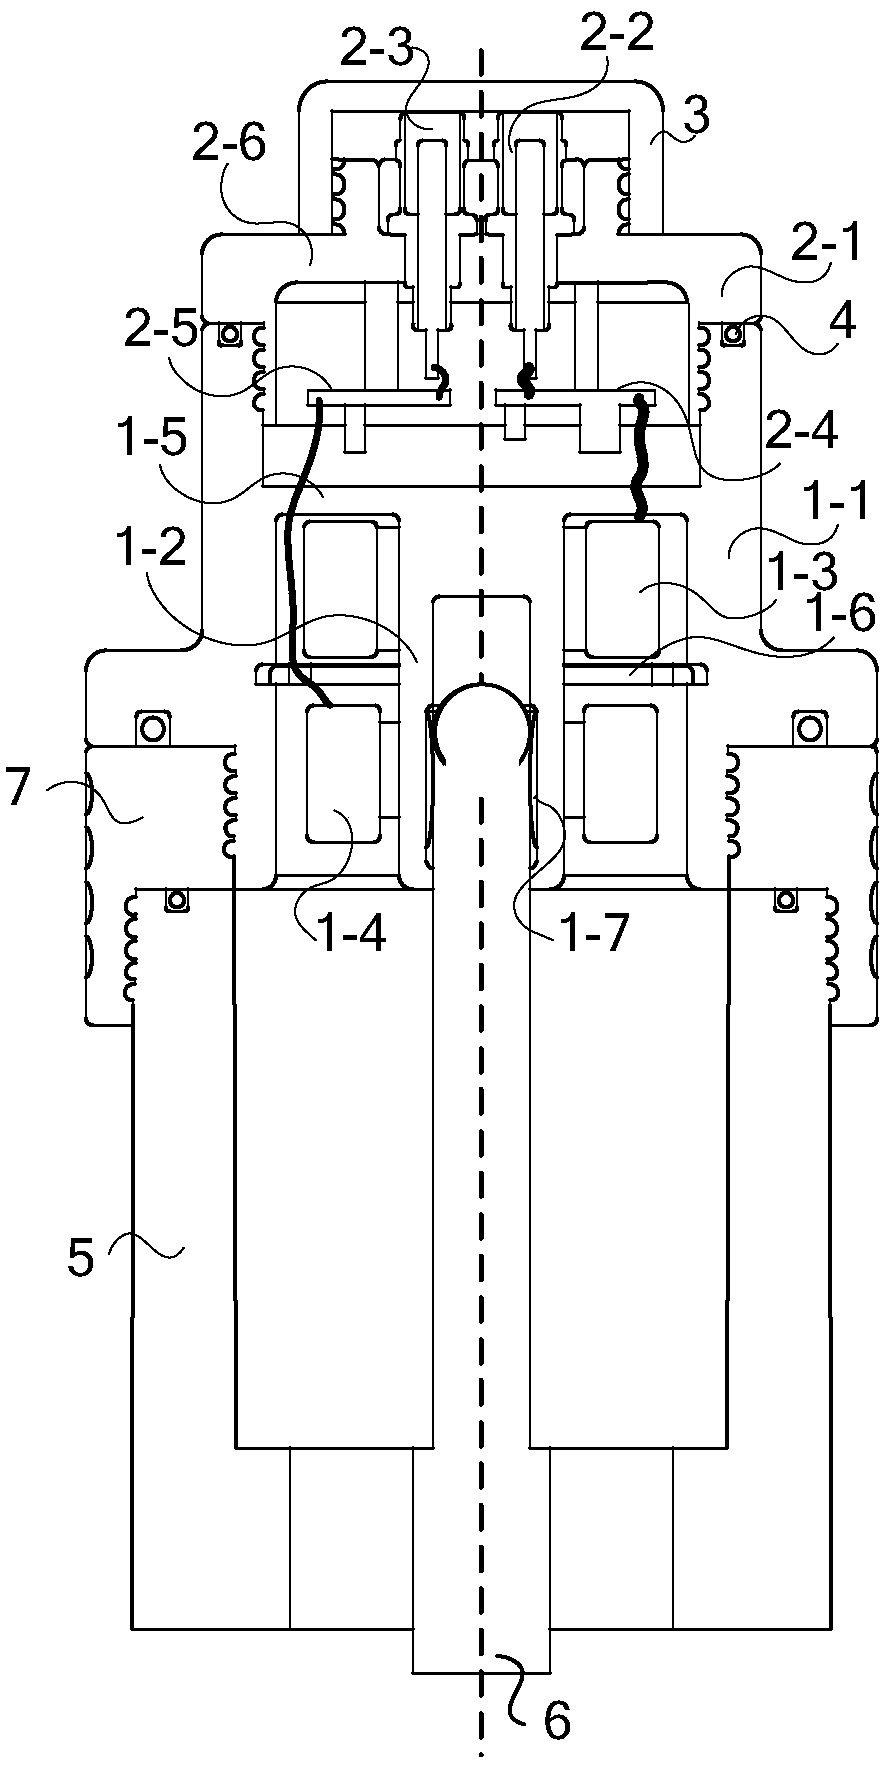 Capacitive casing end screen signal detection device